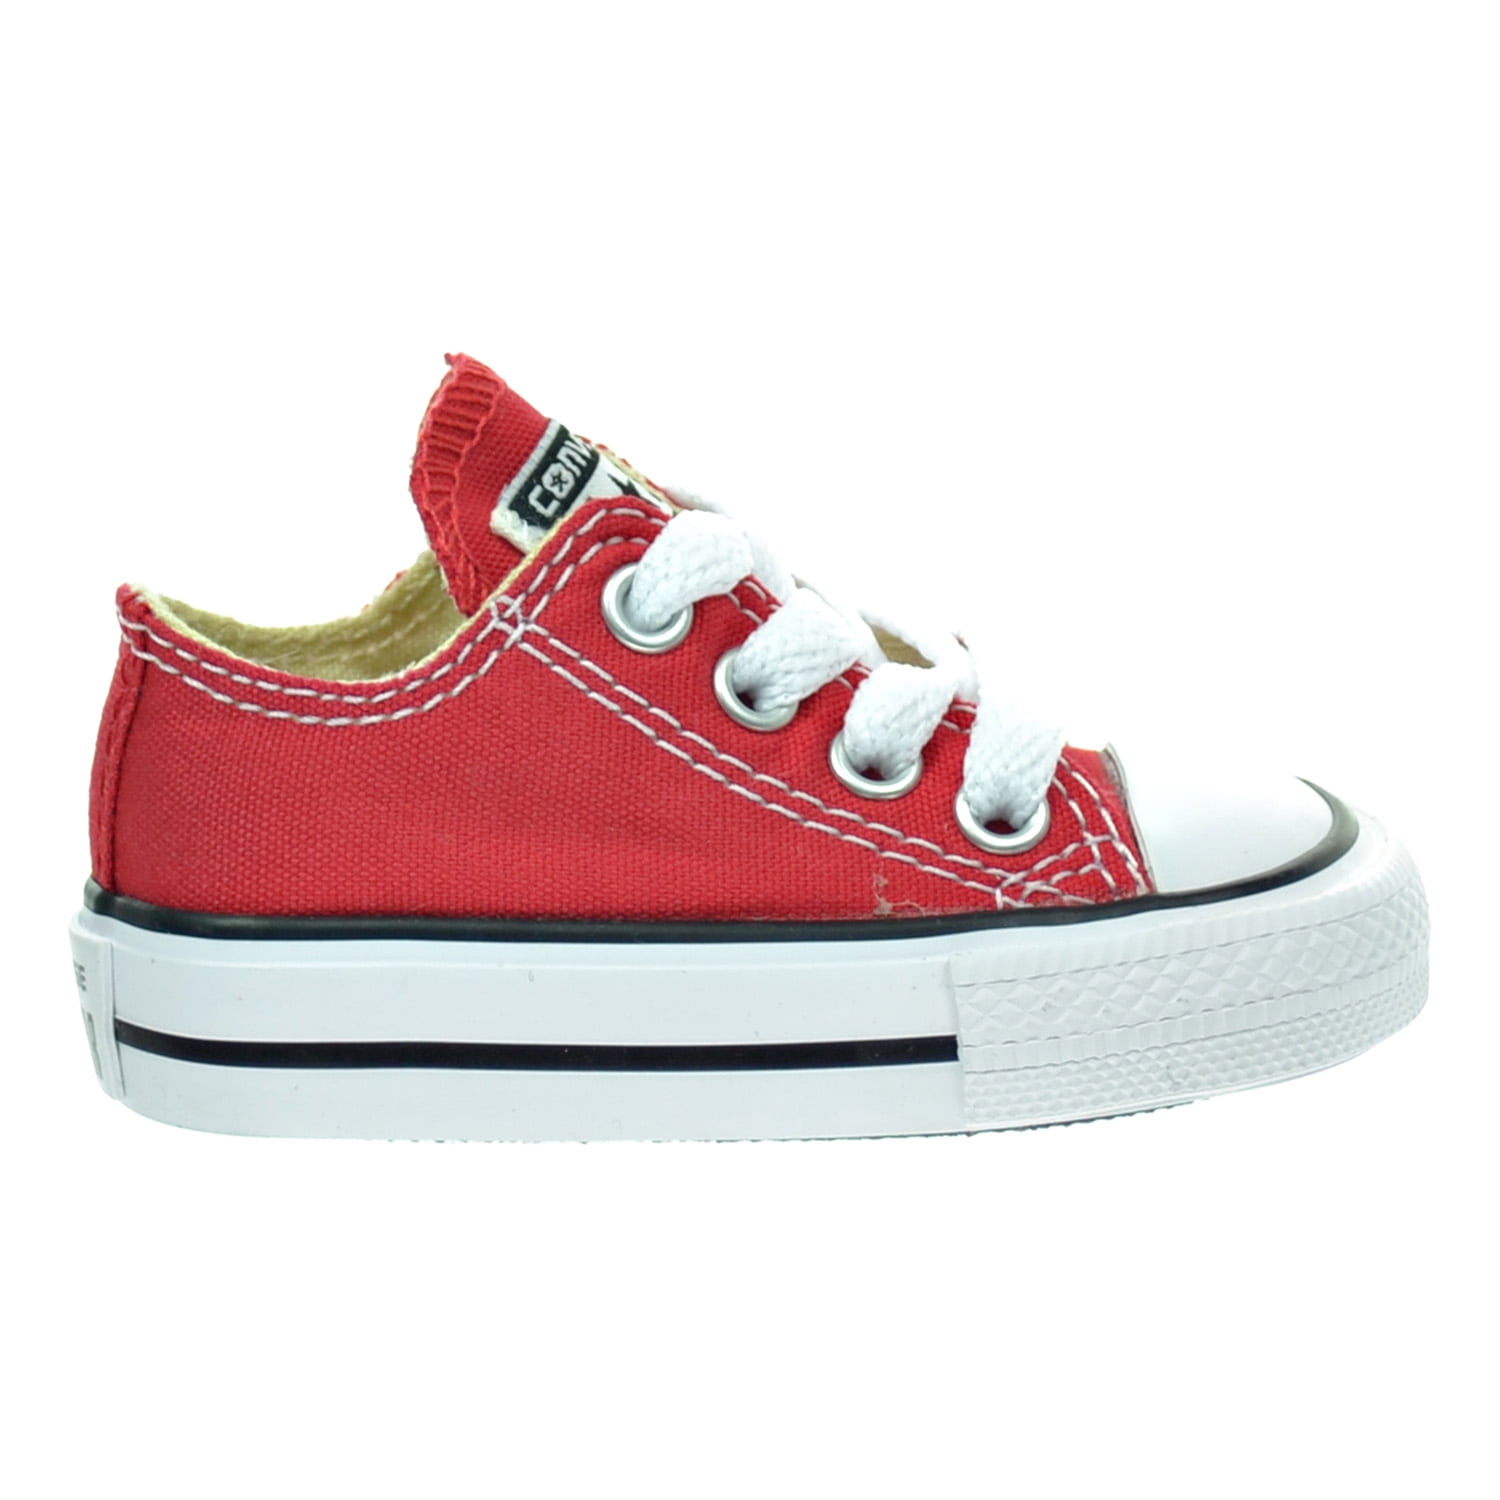 Converse Chuck Taylor All Star Ox Red 7J236 Toddler